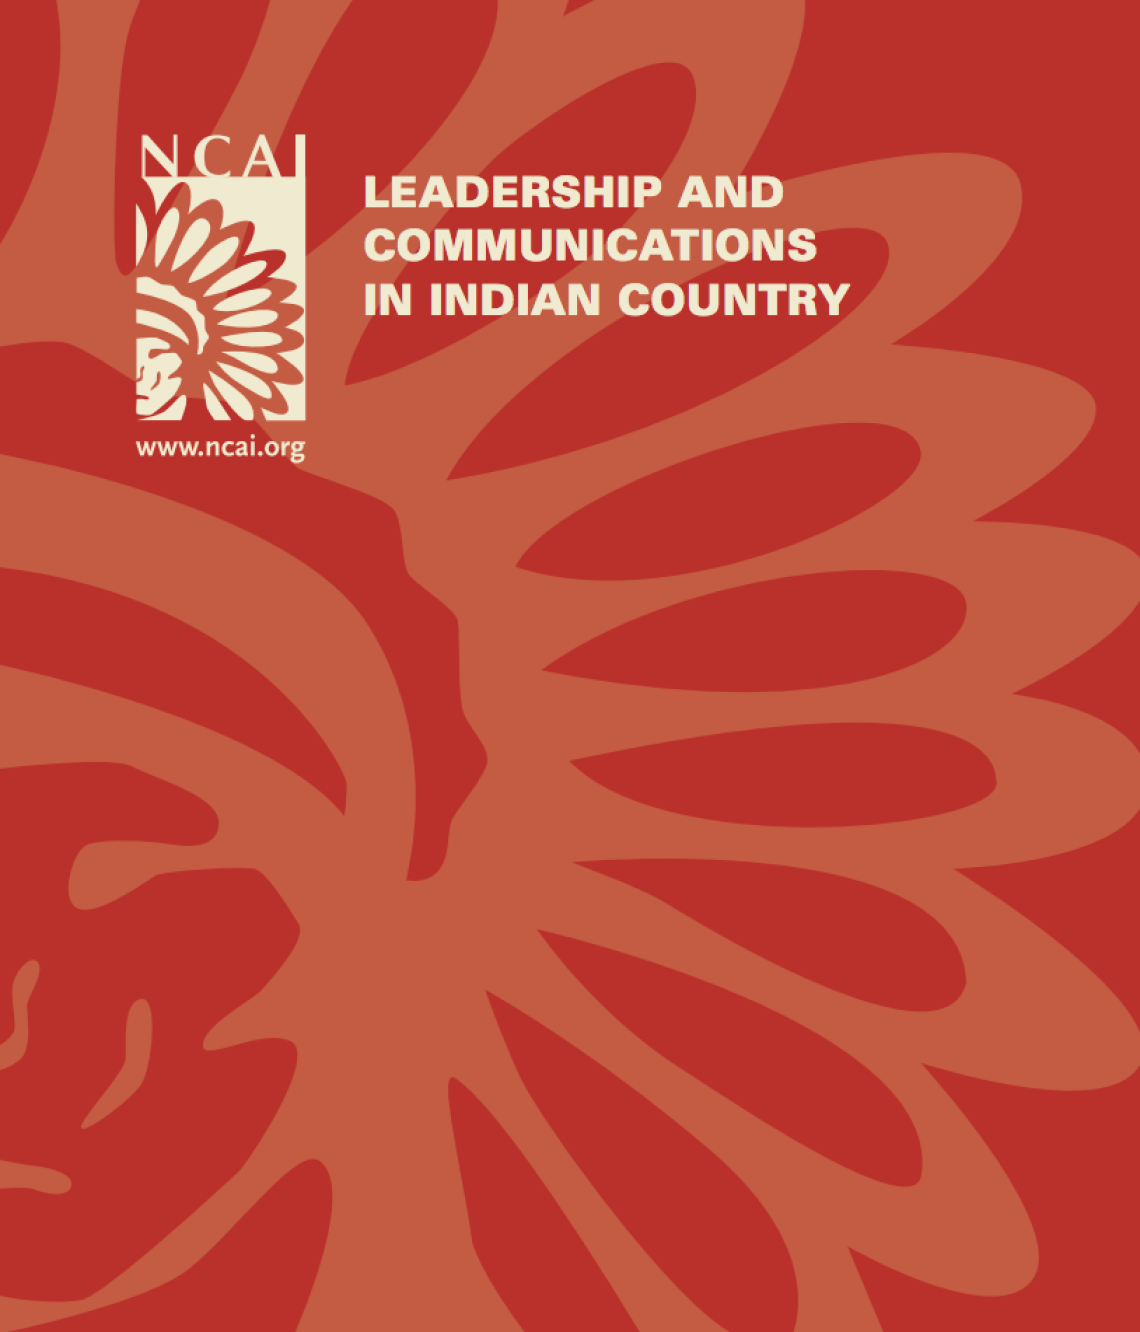 Leadership and Communications in Indian Country